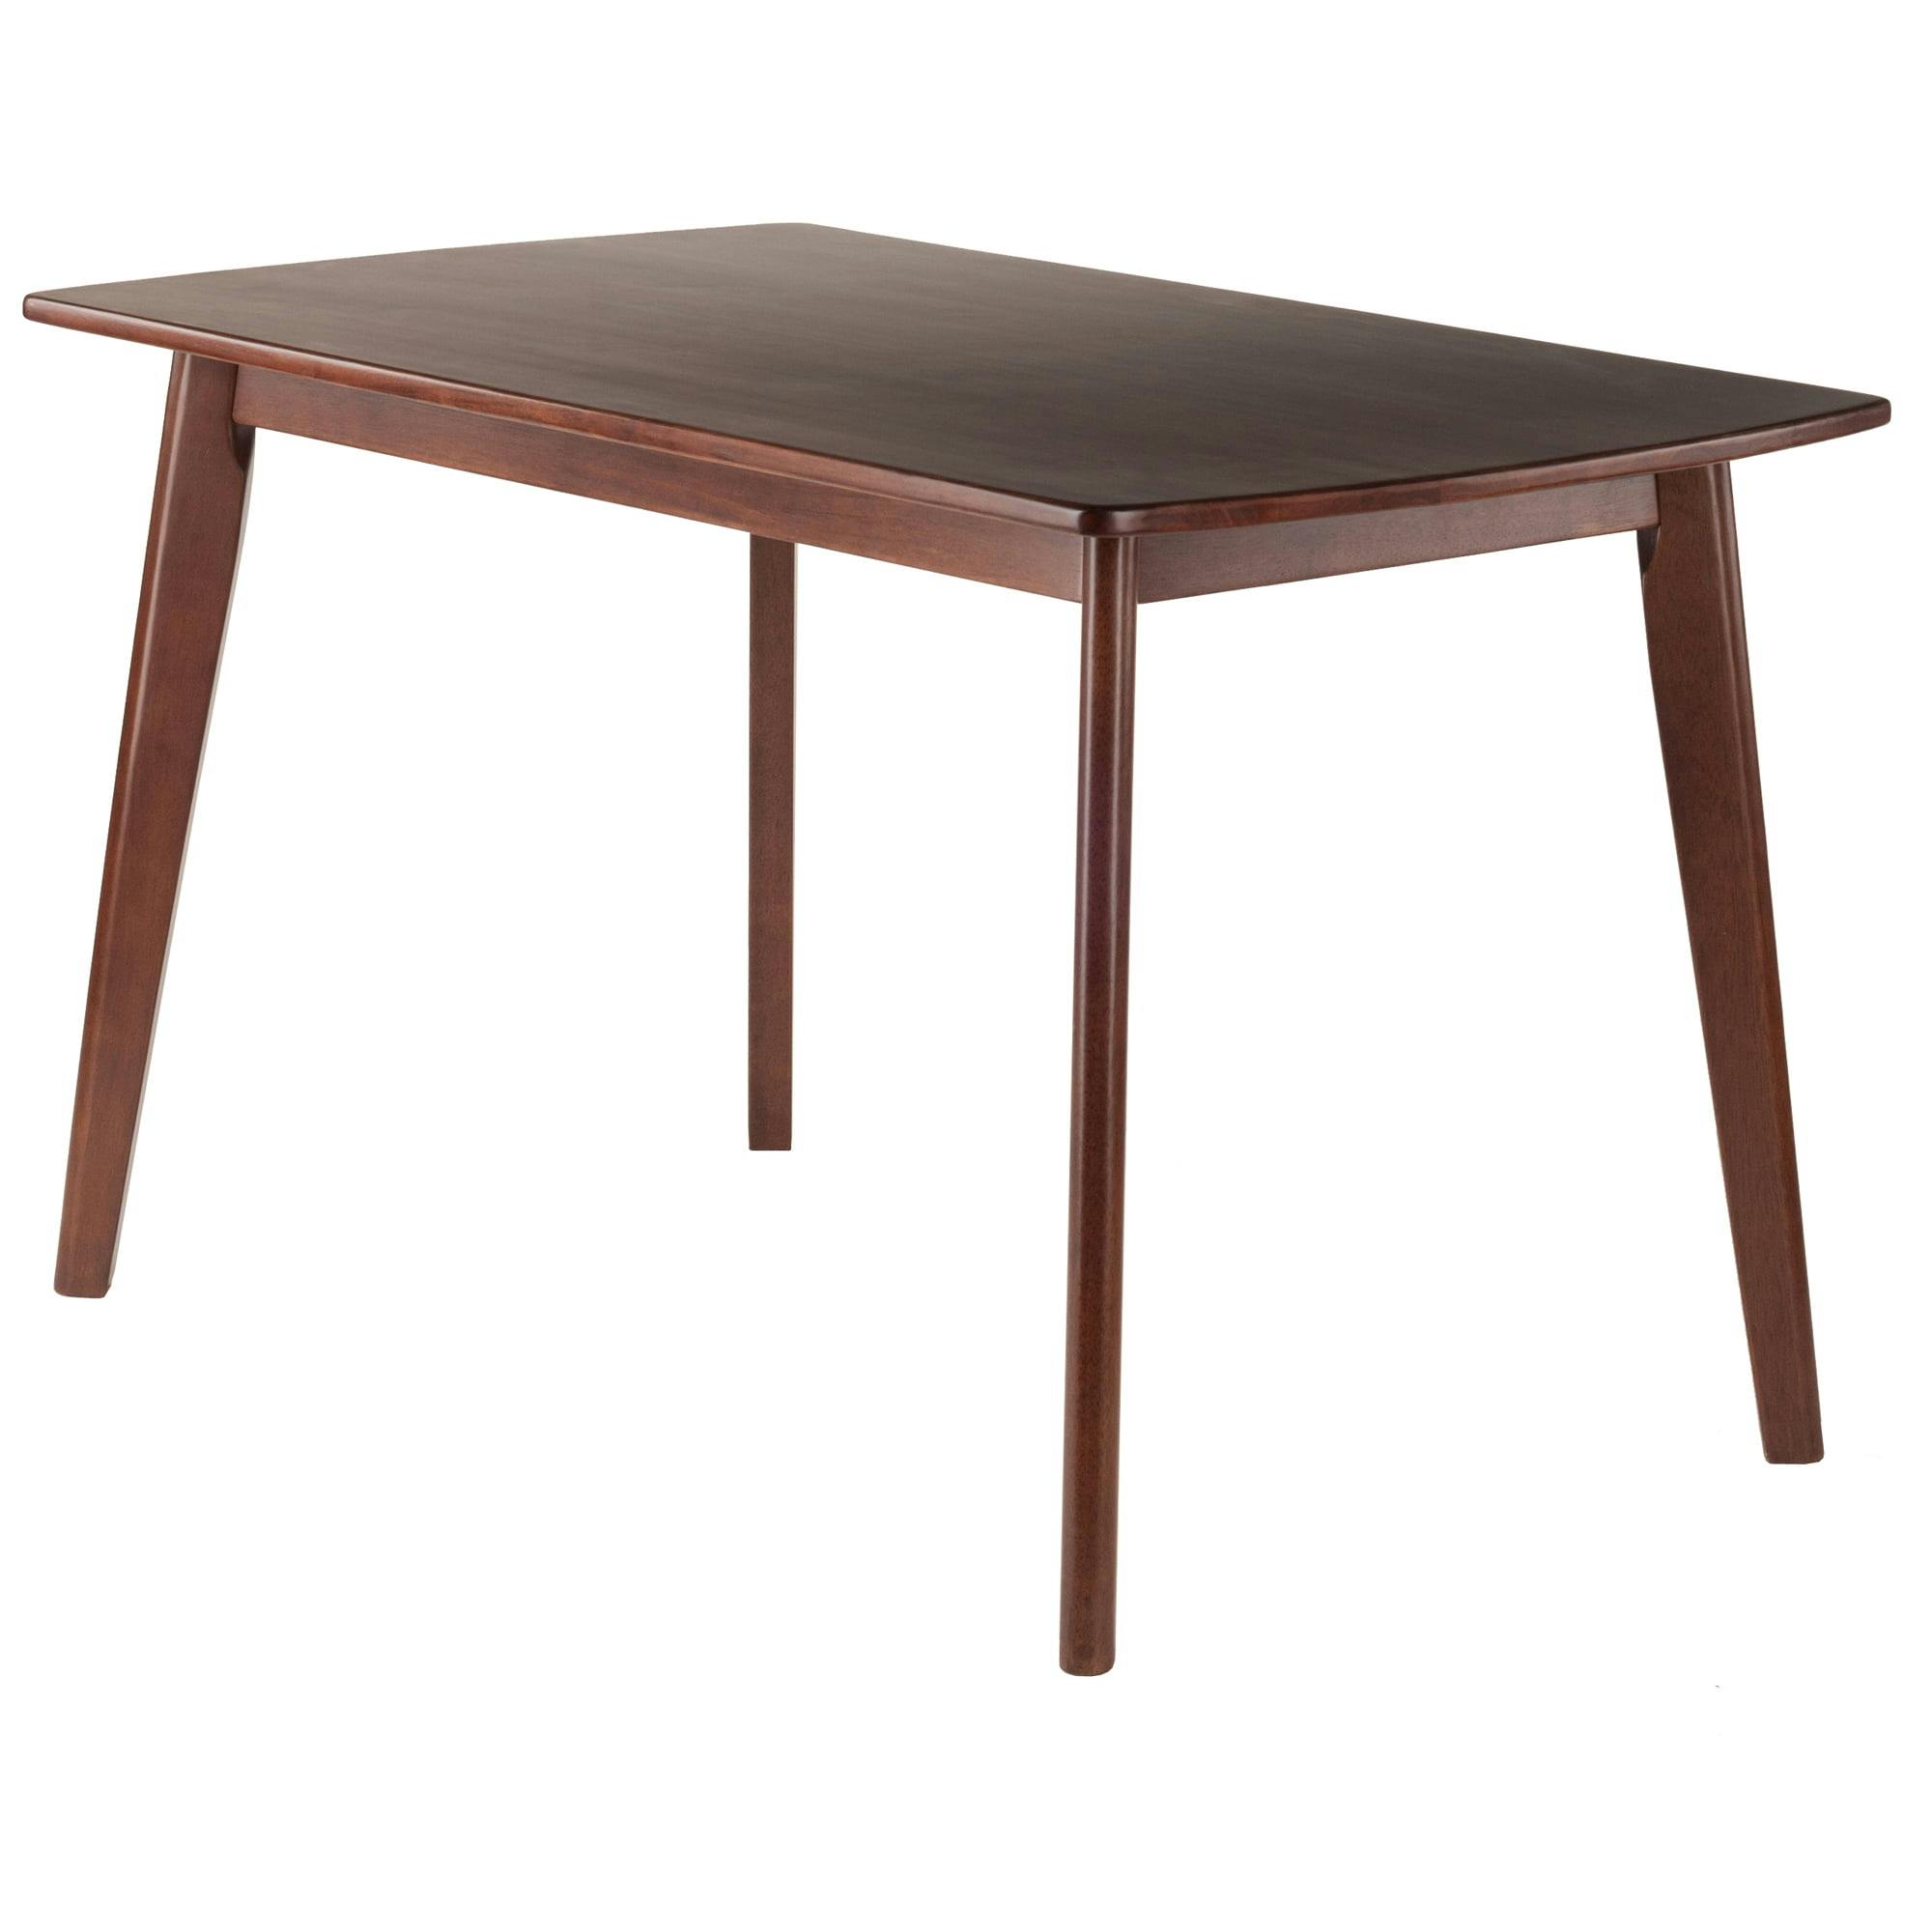 Winsome Shaye Walnut Solid Wood Mid-Century Modern Dining Table